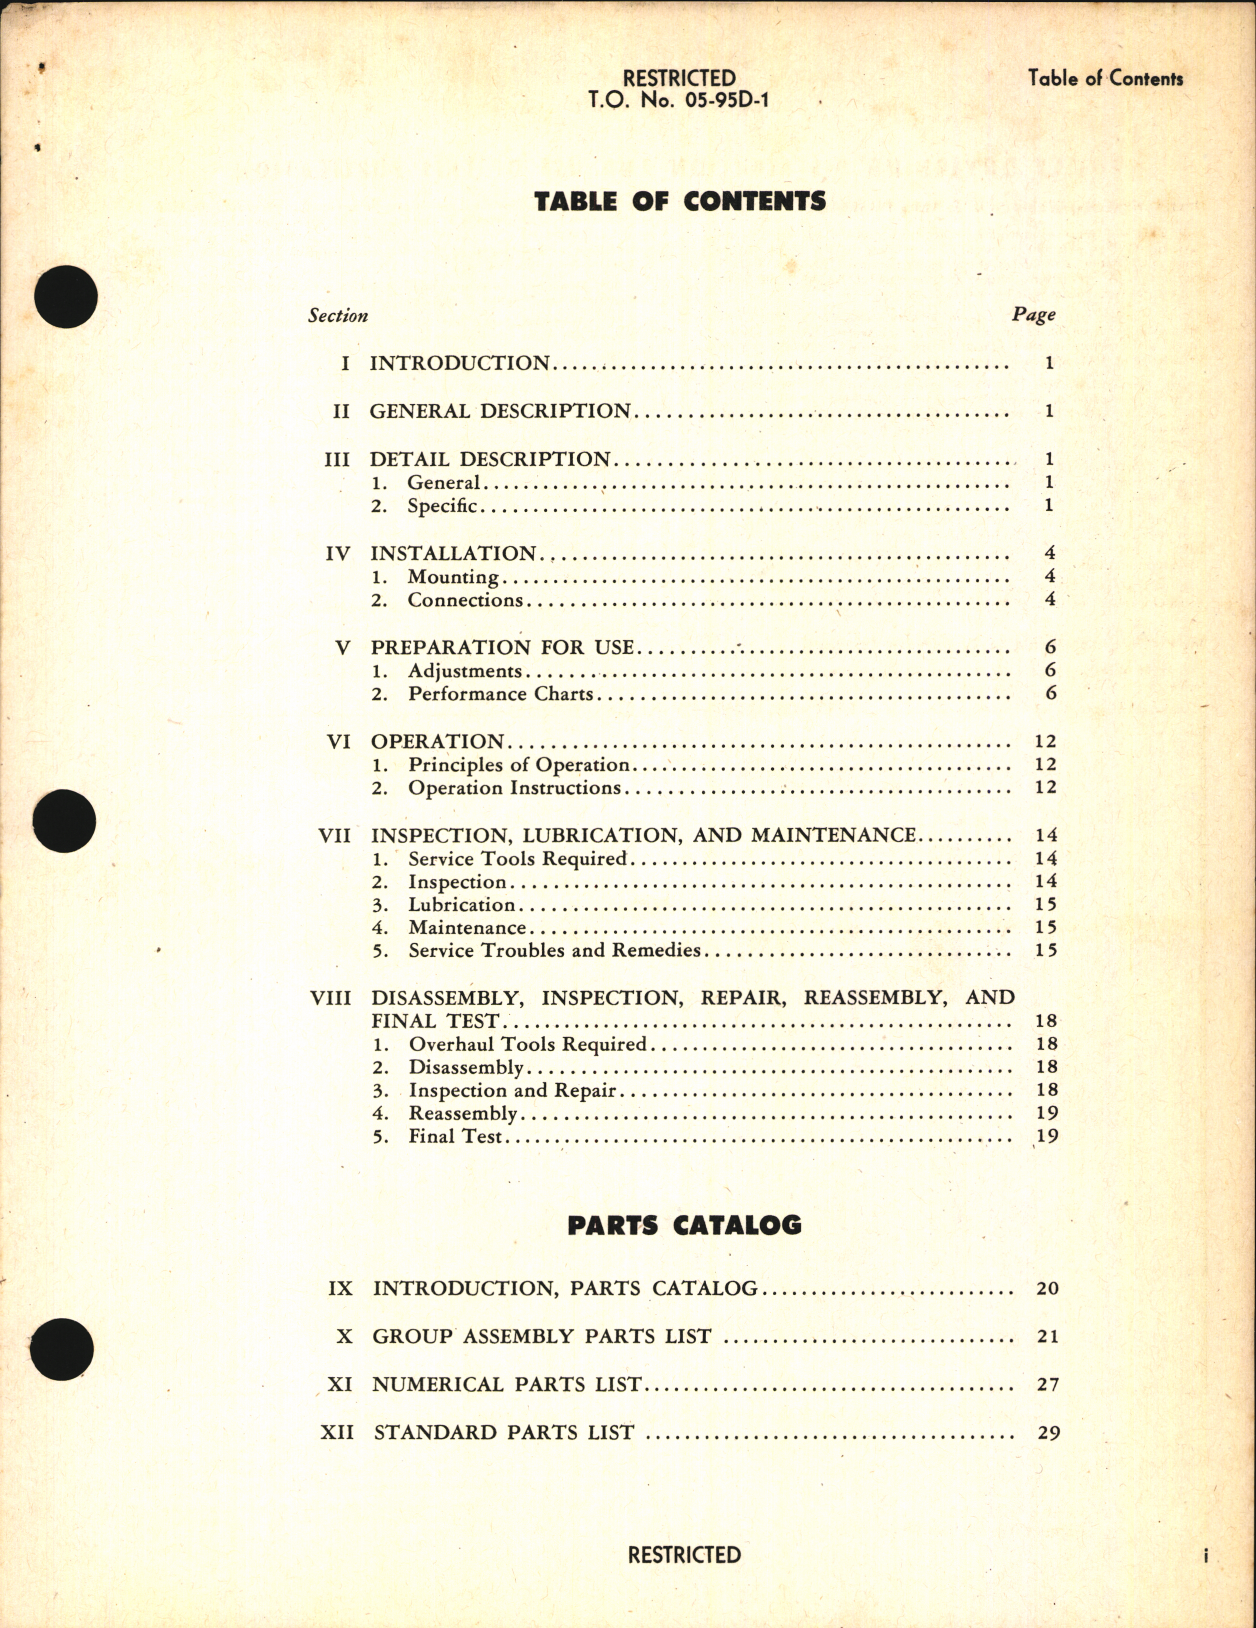 Sample page 3 from AirCorps Library document: Operation, Service and Overhaul Instructions with Parts Catalog for Demand Oxygen Regulator Test Stand Part No. OT-122D